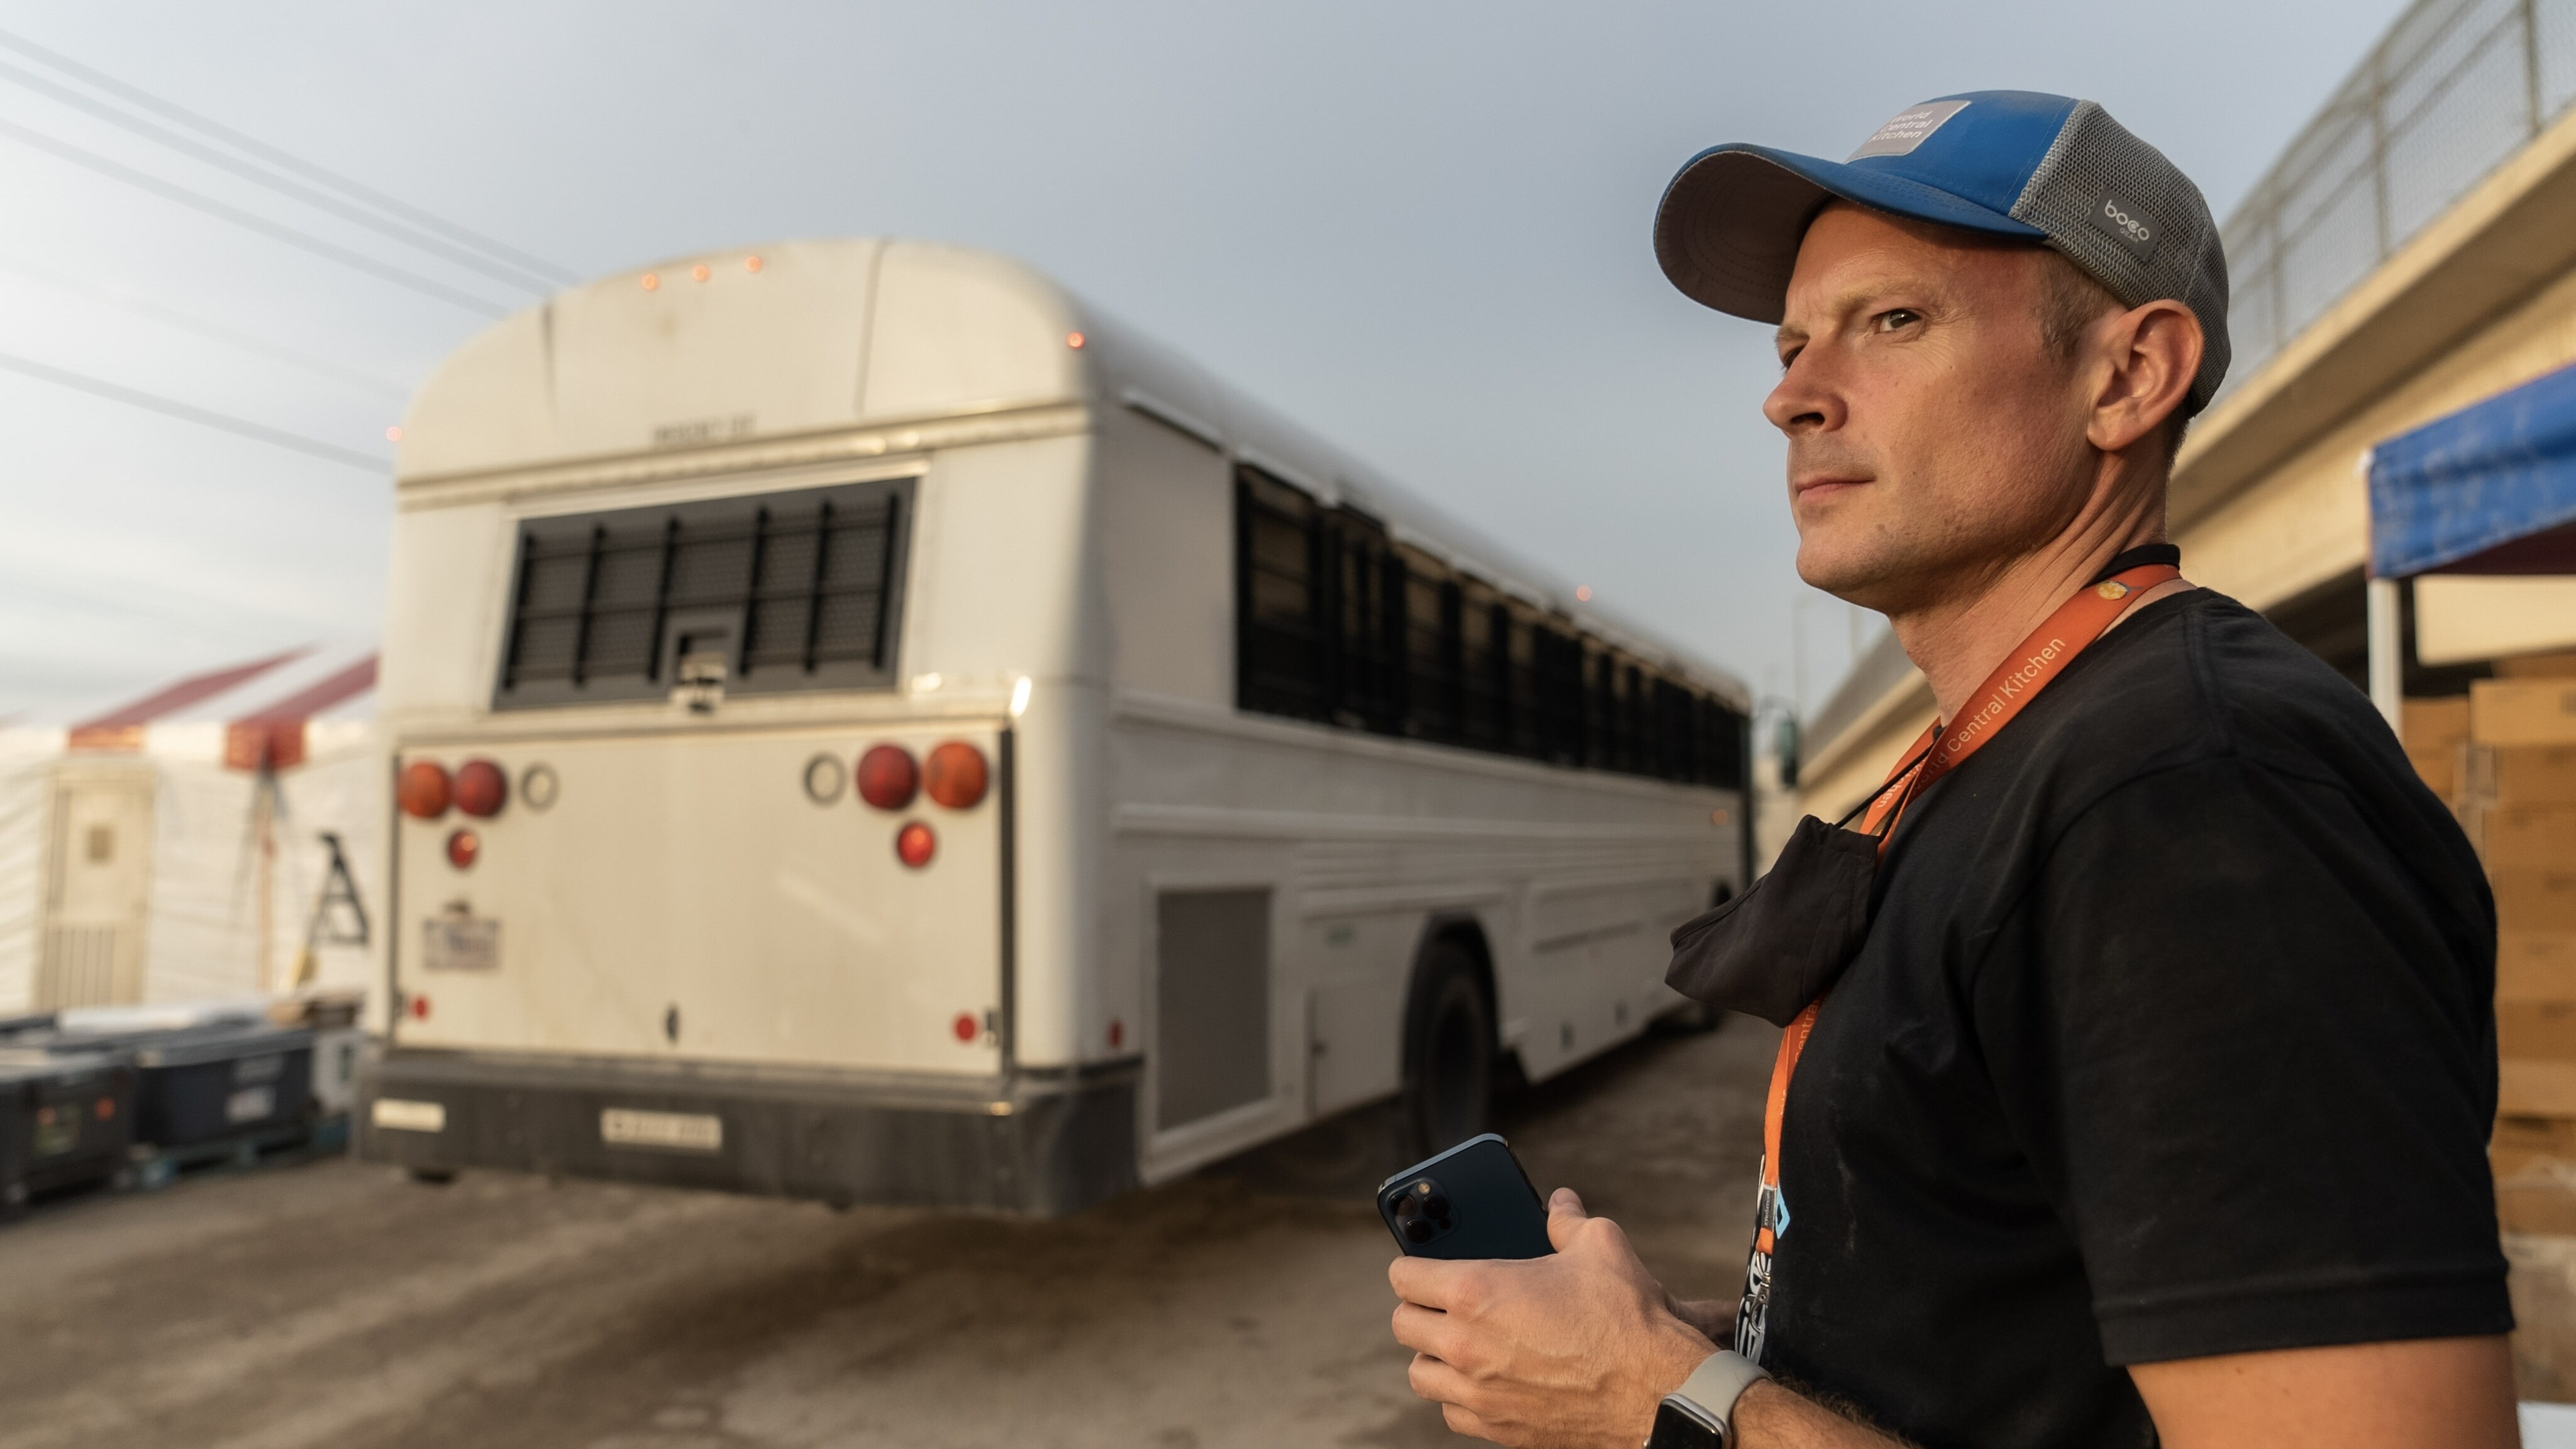 World Central Kitchen CEO, Nate Mook, watches as buses full of Haitian Migrants are shuttled to deportation holding areas in Texas. (Credit: National Geographic/Michael Atwood)